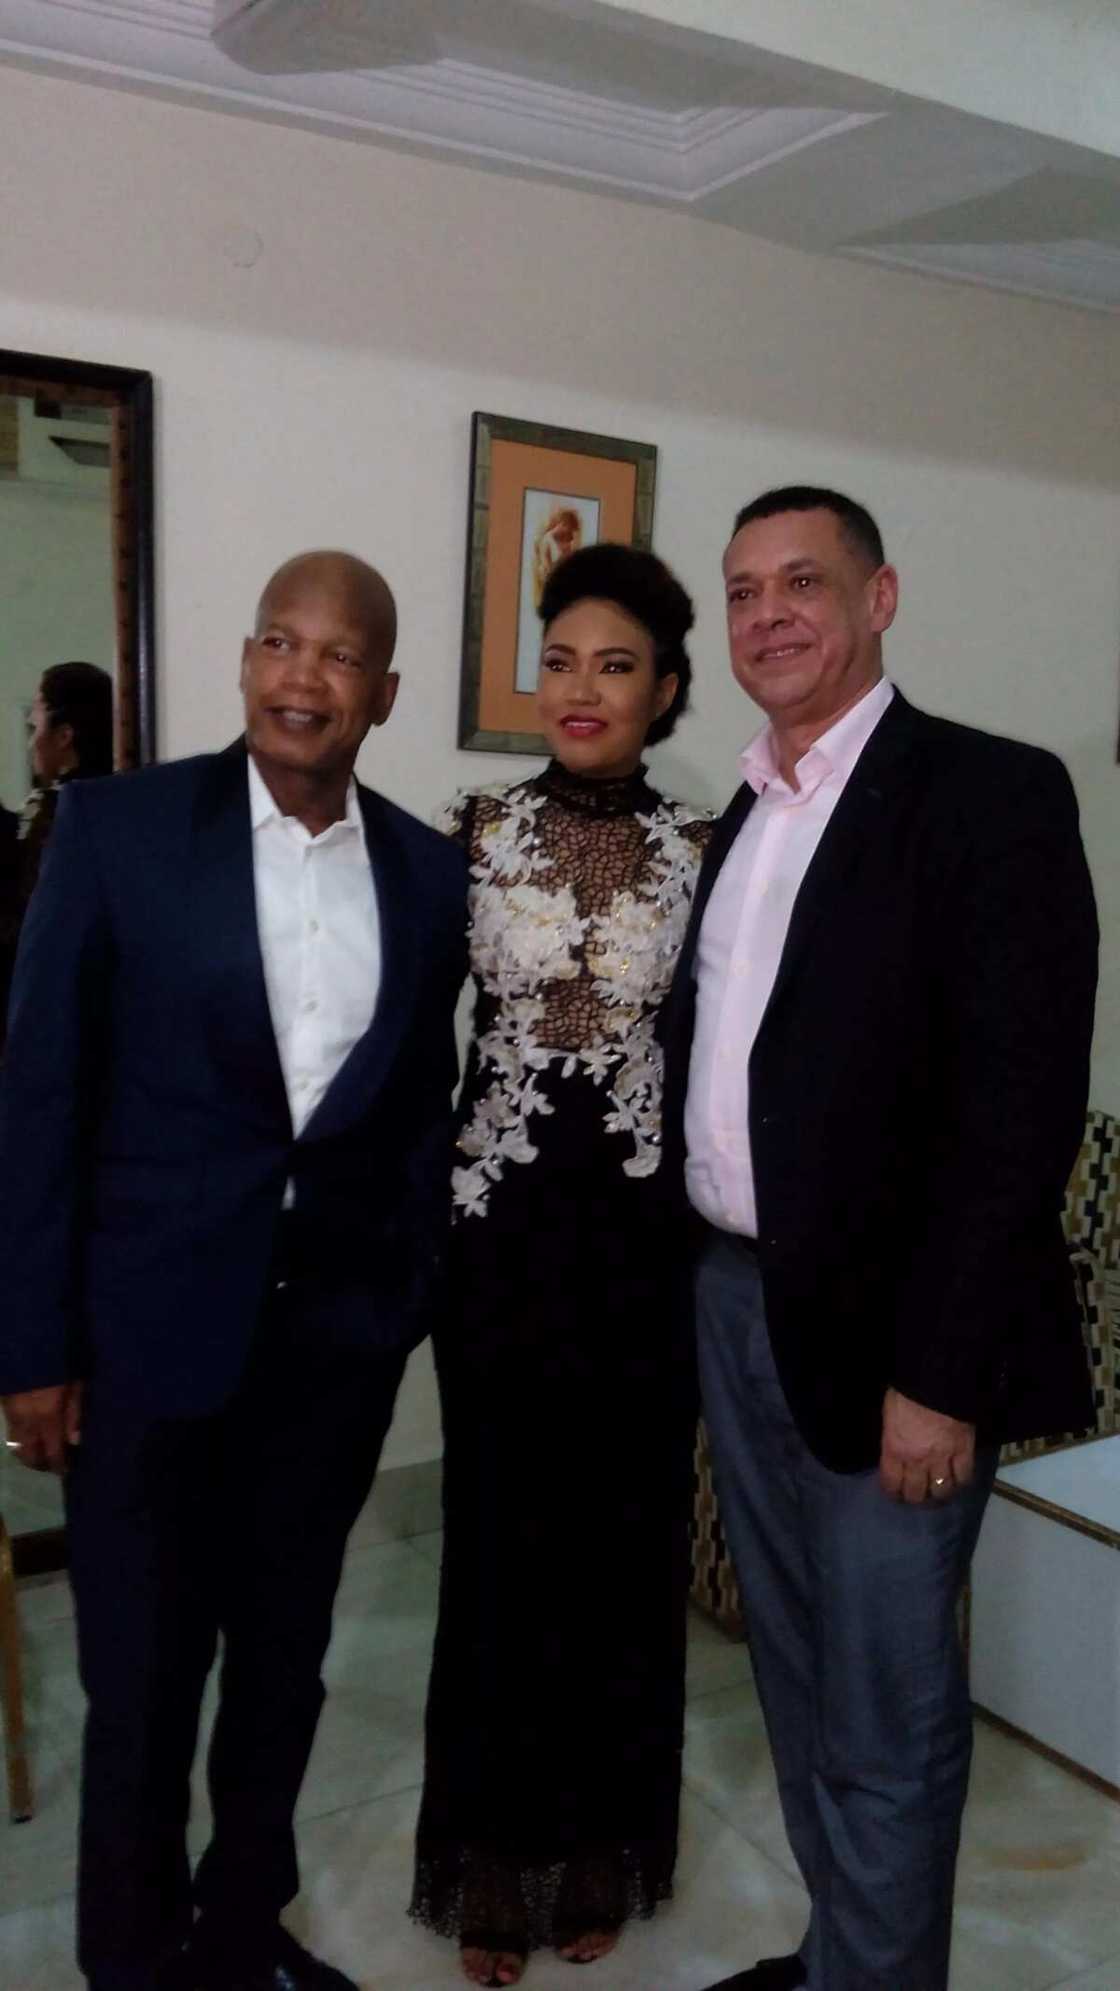 Anna Banner turns father to chaperone as she attends event (photos)